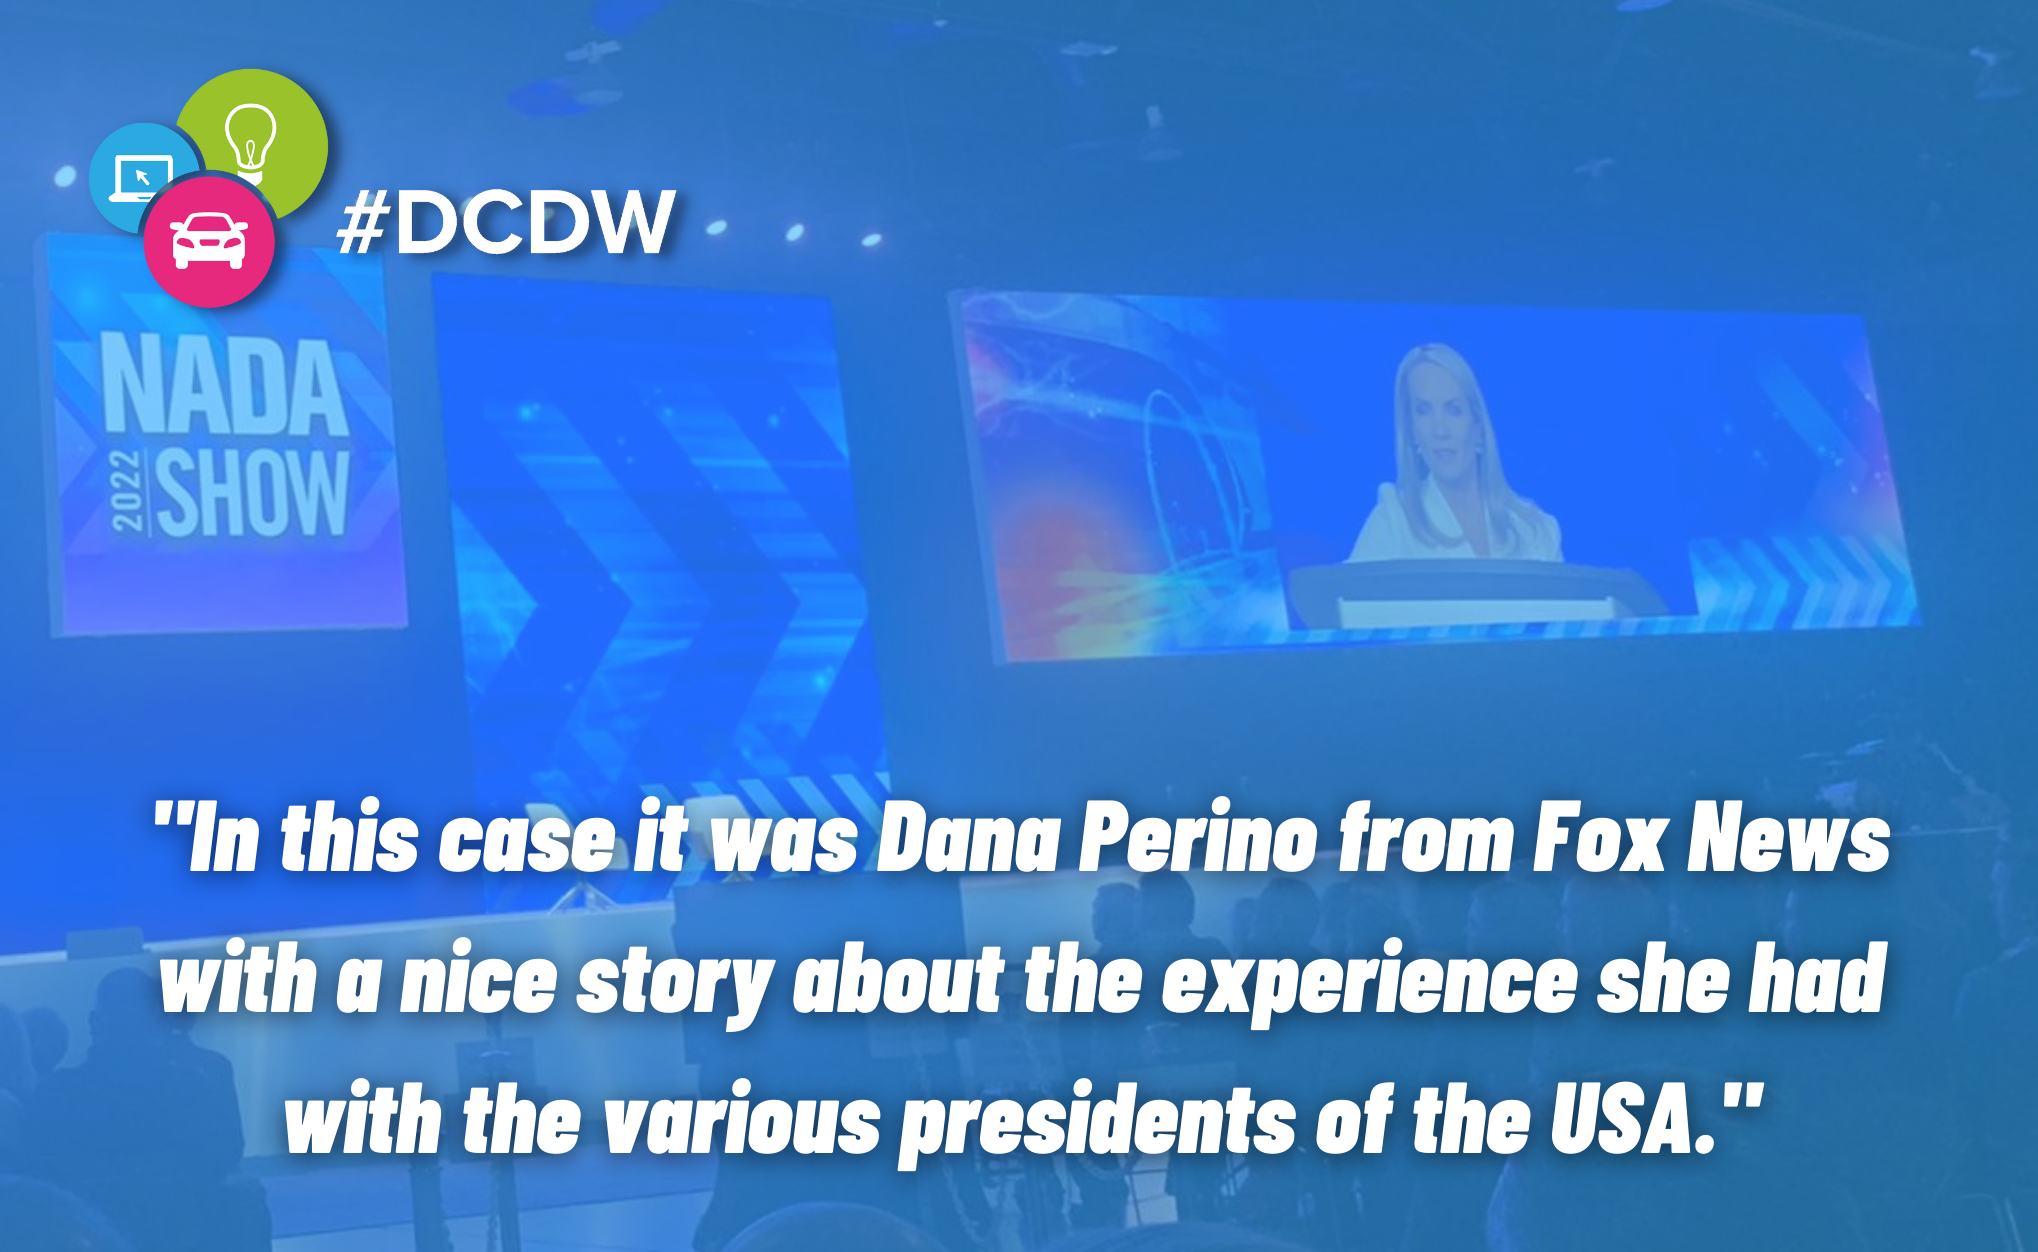 In this case it was Dana Perino from Fox News with a nice story about the experience she had with the various presidents of the USA.